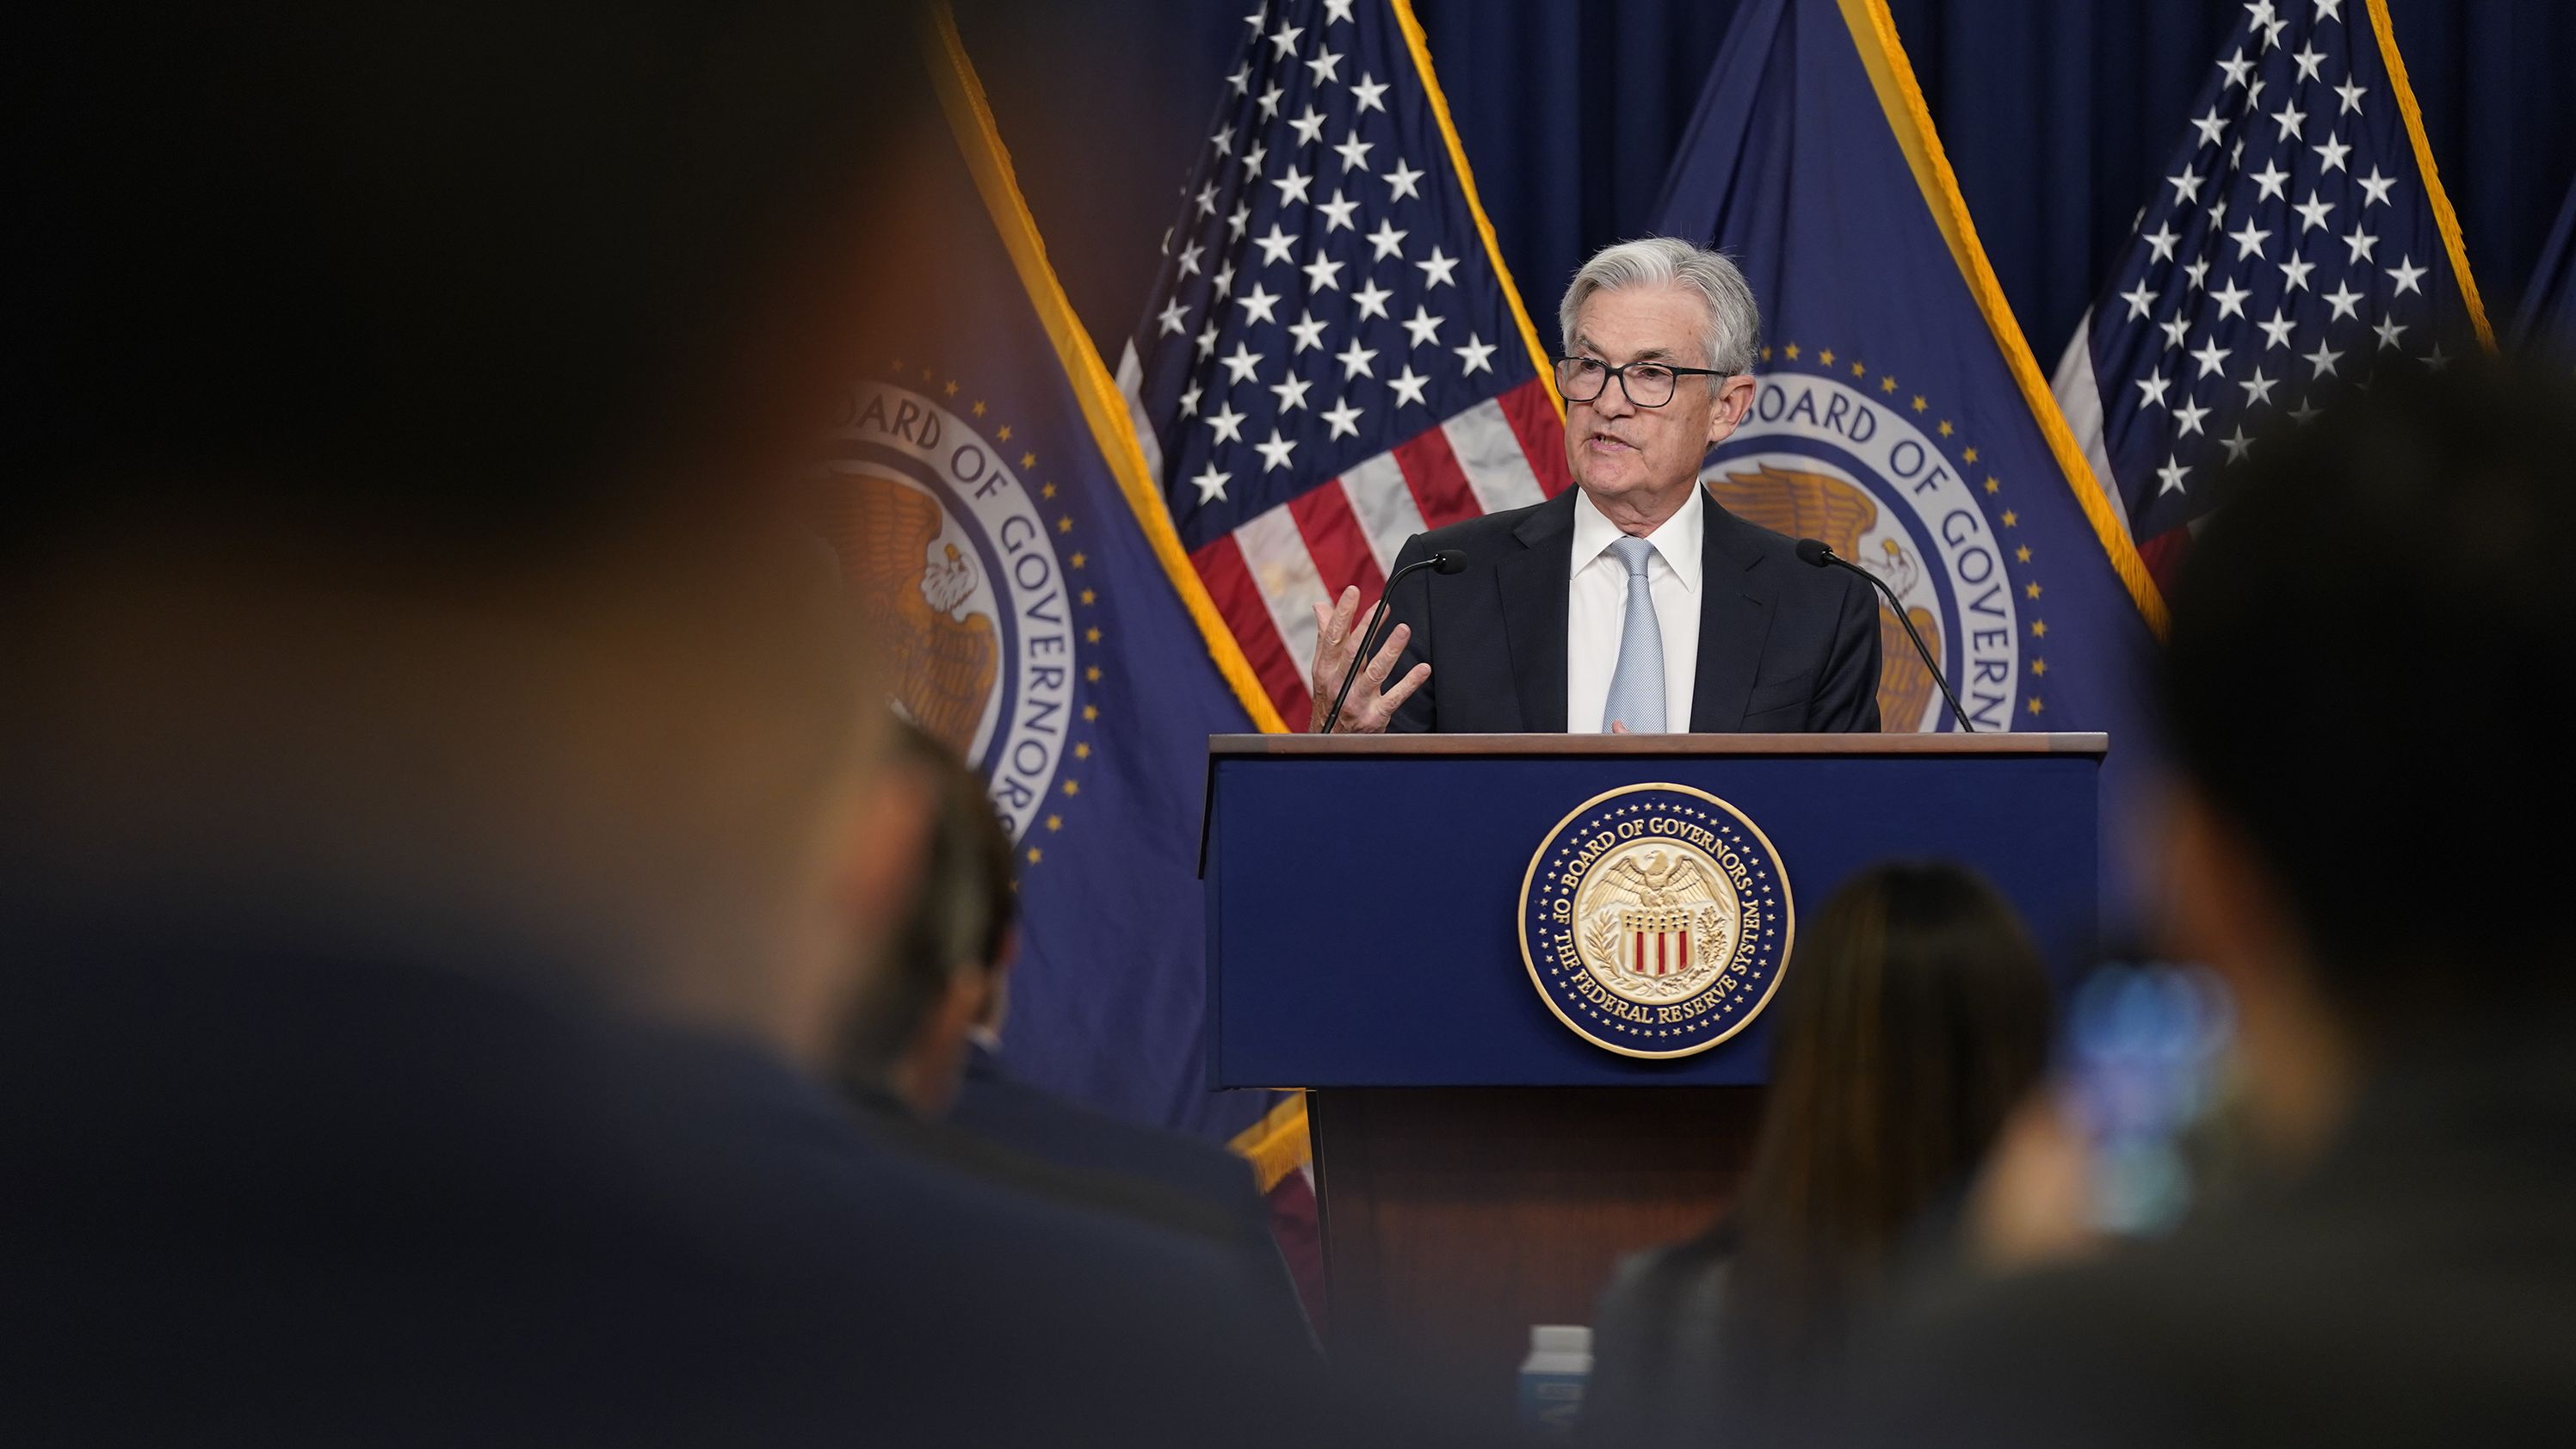 Federal Reserve Chairman Jerome Powell speaks at a news conference in Washington, DC, on Wednesday, November 2. The Federal Reserve approved <a href="https://www.cnn.com/business/live-news/stocks-market-fed-rate-hike/index.html" target="_blank">a fourth-straight rate hike</a> on Wednesday as part of its aggressive battle to bring down the white-hot inflation that is plaguing the US economy.